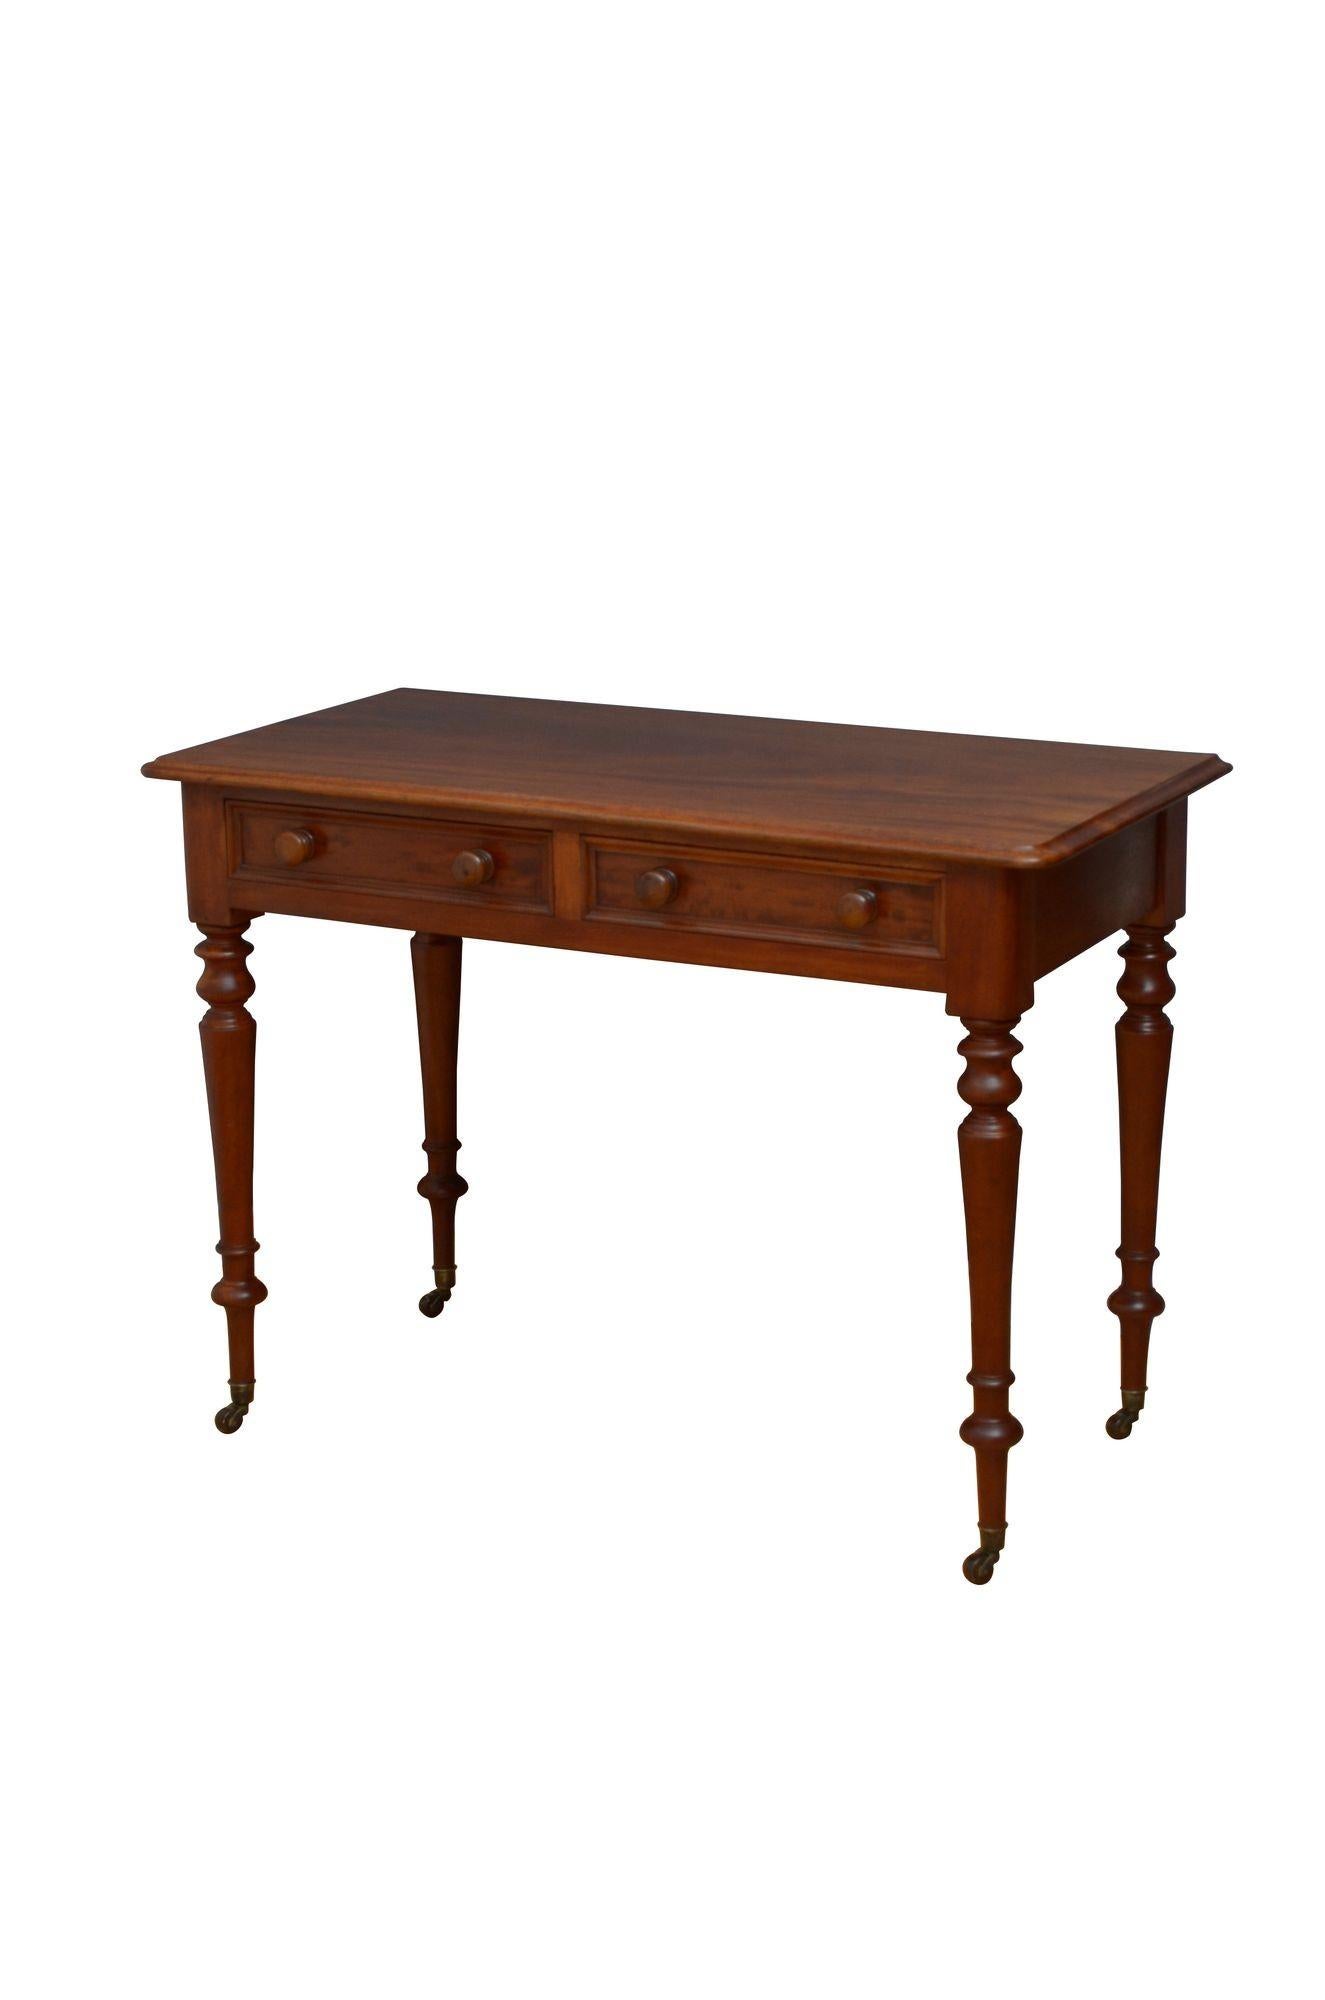 k0273 Fine quality, solid mahogany Victorian side table / writing table / dressing table, having figured, solid mahogany top with moulded edge above two oak lined drawers with moulded edge and original turned knobs, all standing on slender turned